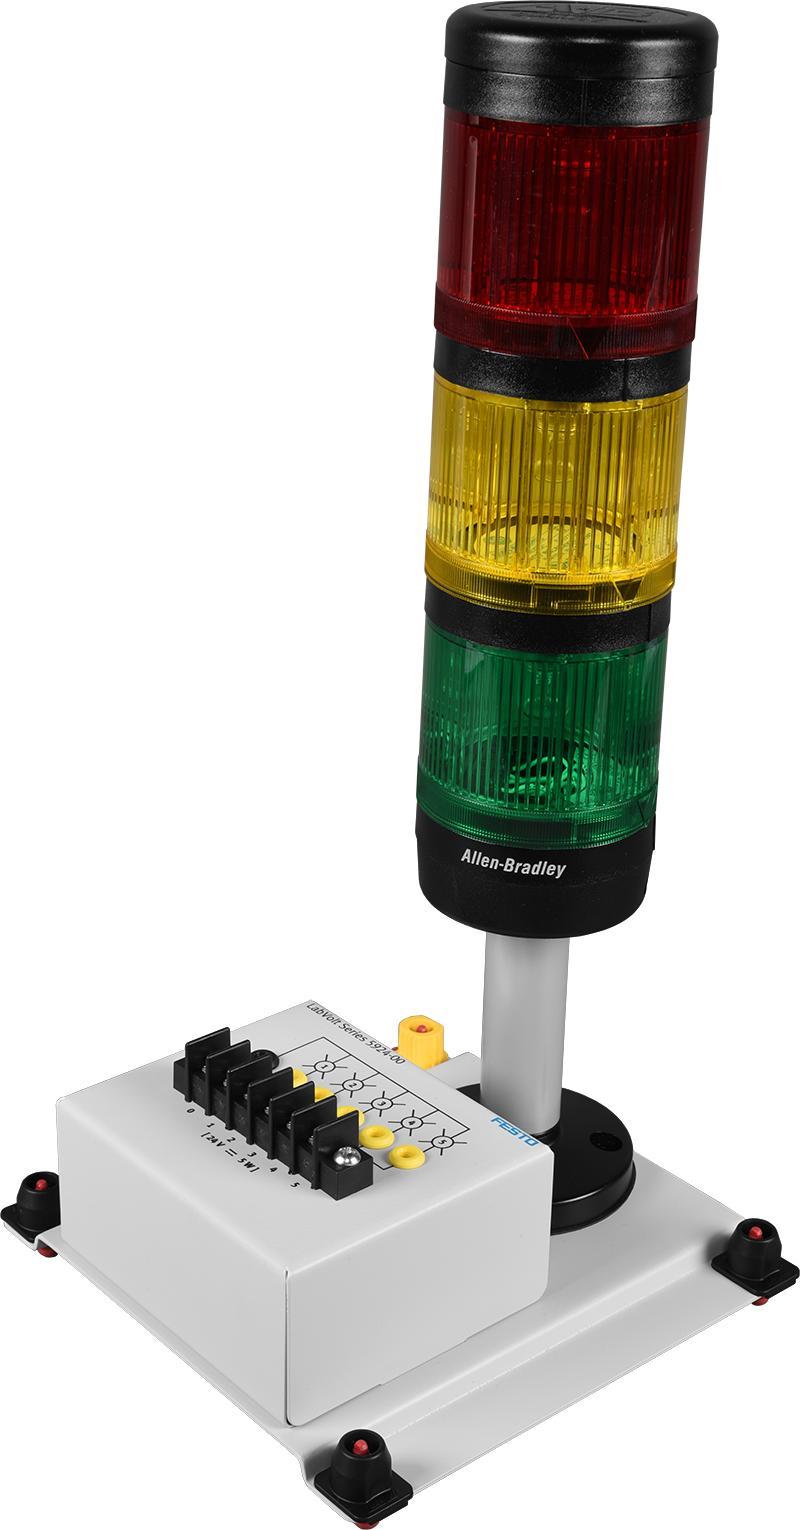 The sensor is mounted on a flexible support for easy positioning. Electrical connections can be made using either the banana jacks or the terminal block. Sensing Range 20 mm (0.